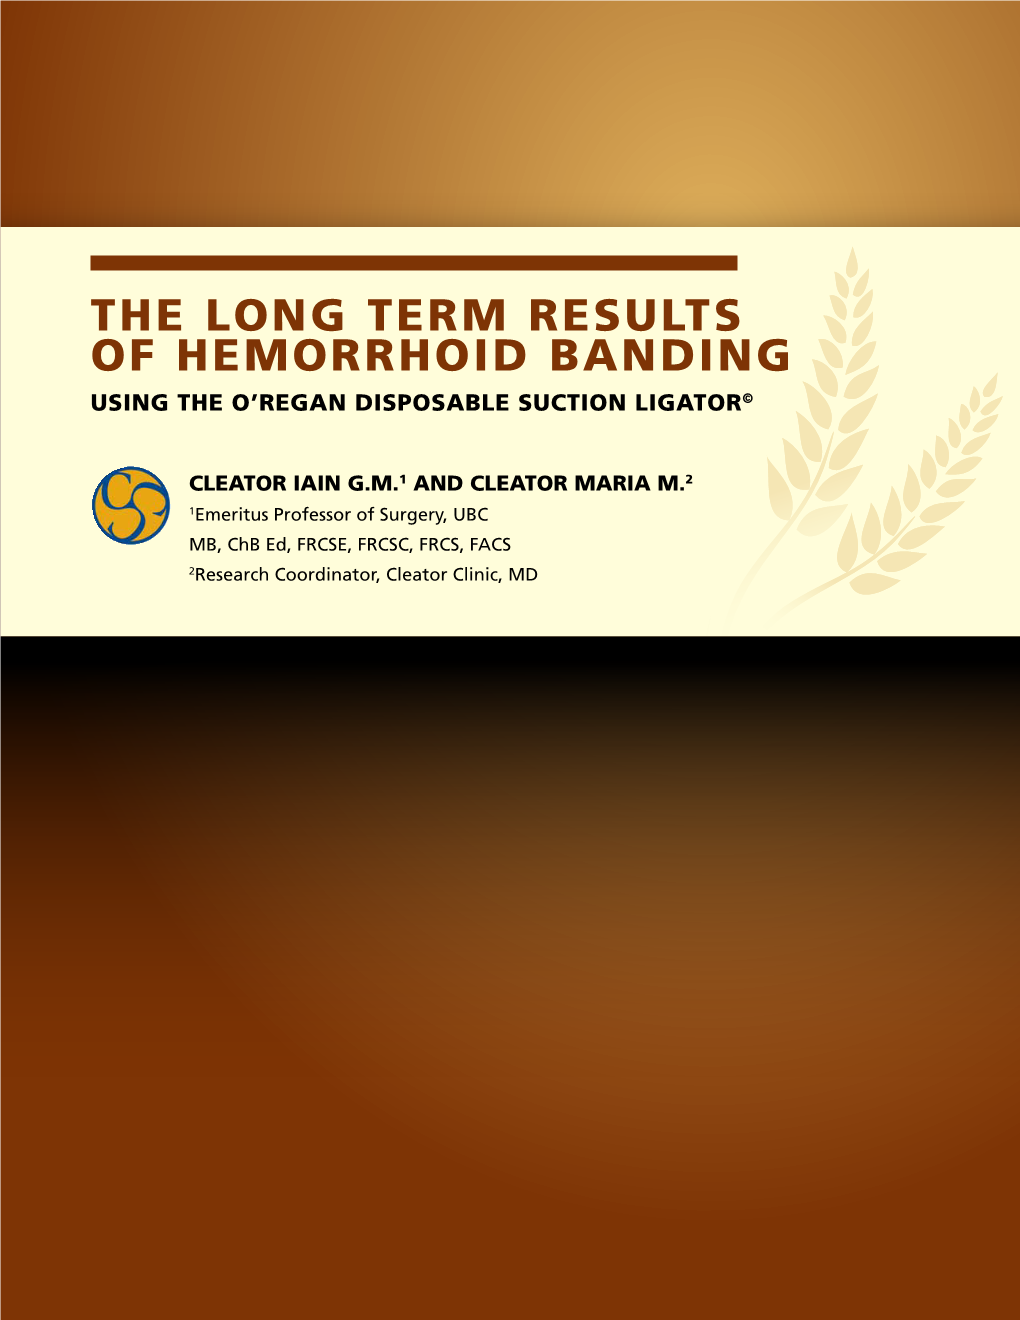 The Long Term Results of Hemorrhoid Banding Using the O’Regan Disposable Suction Ligator©